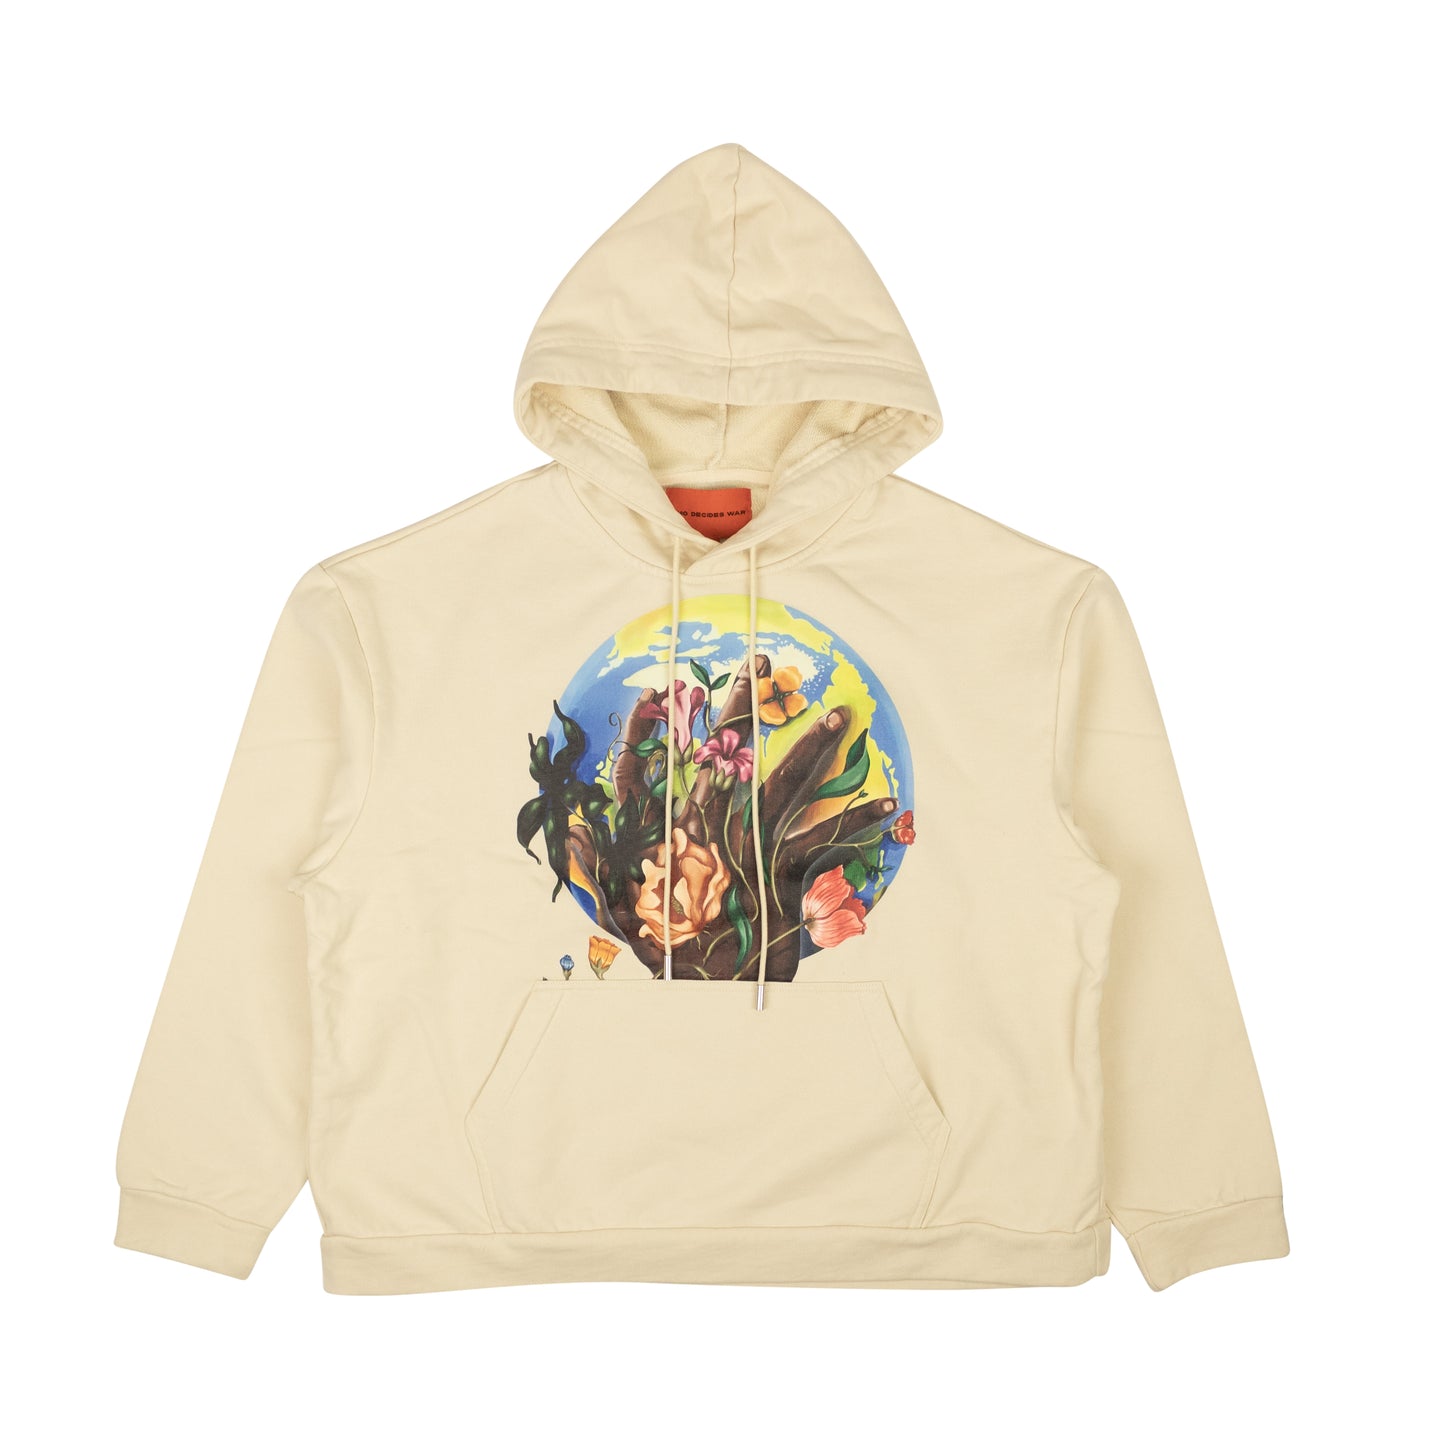 Who Decides War Roots Of Peace Hooded Pullover - Cream